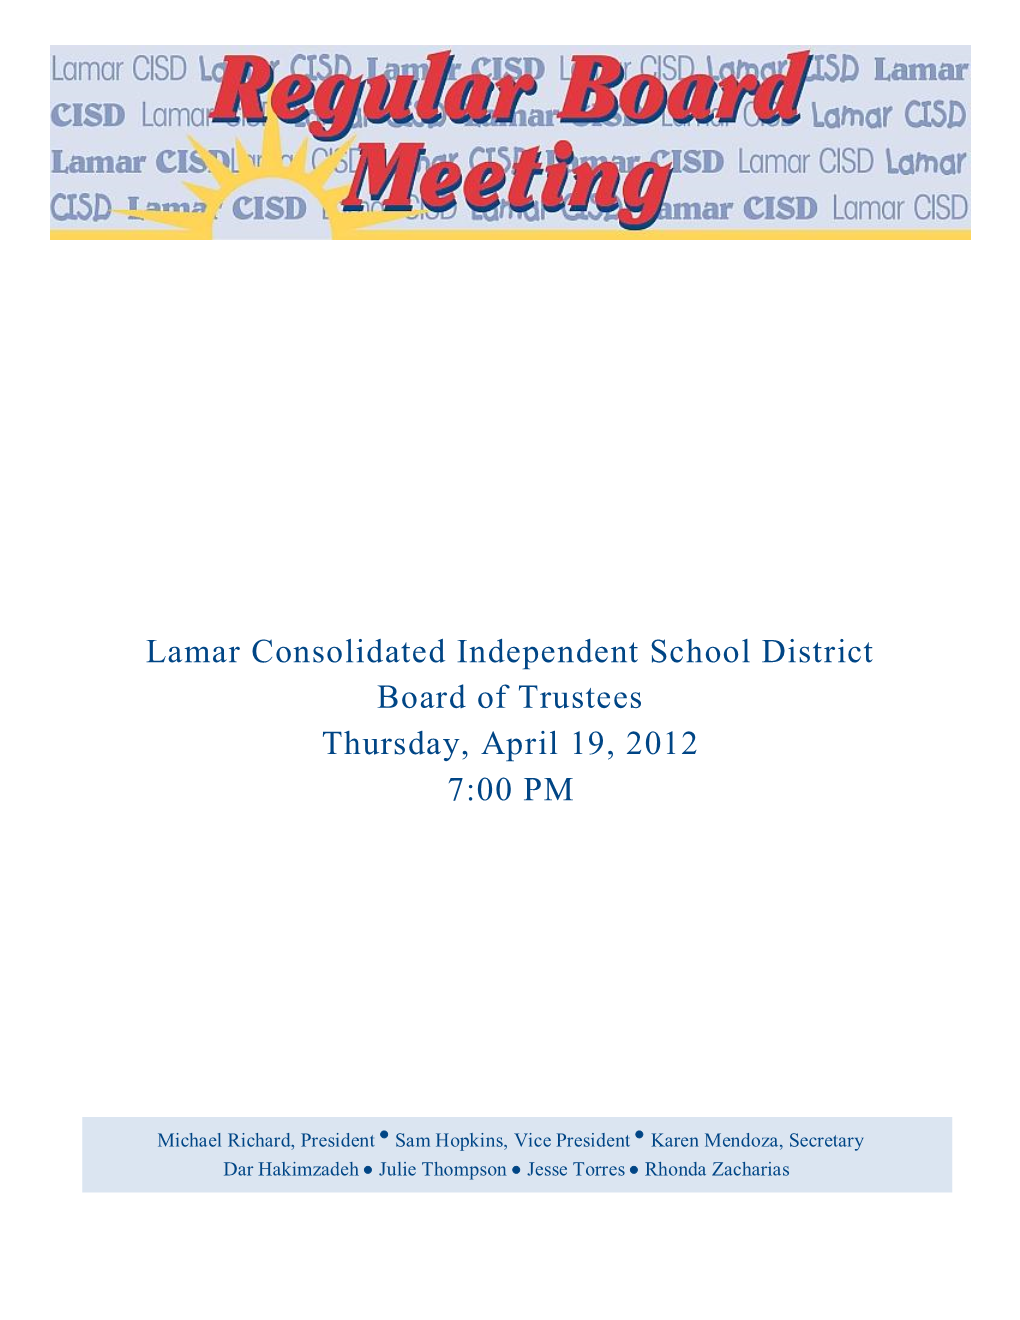 Lamar Consolidated Independent School District Board of Trustees Thursday, April 19, 2012 7:00 PM